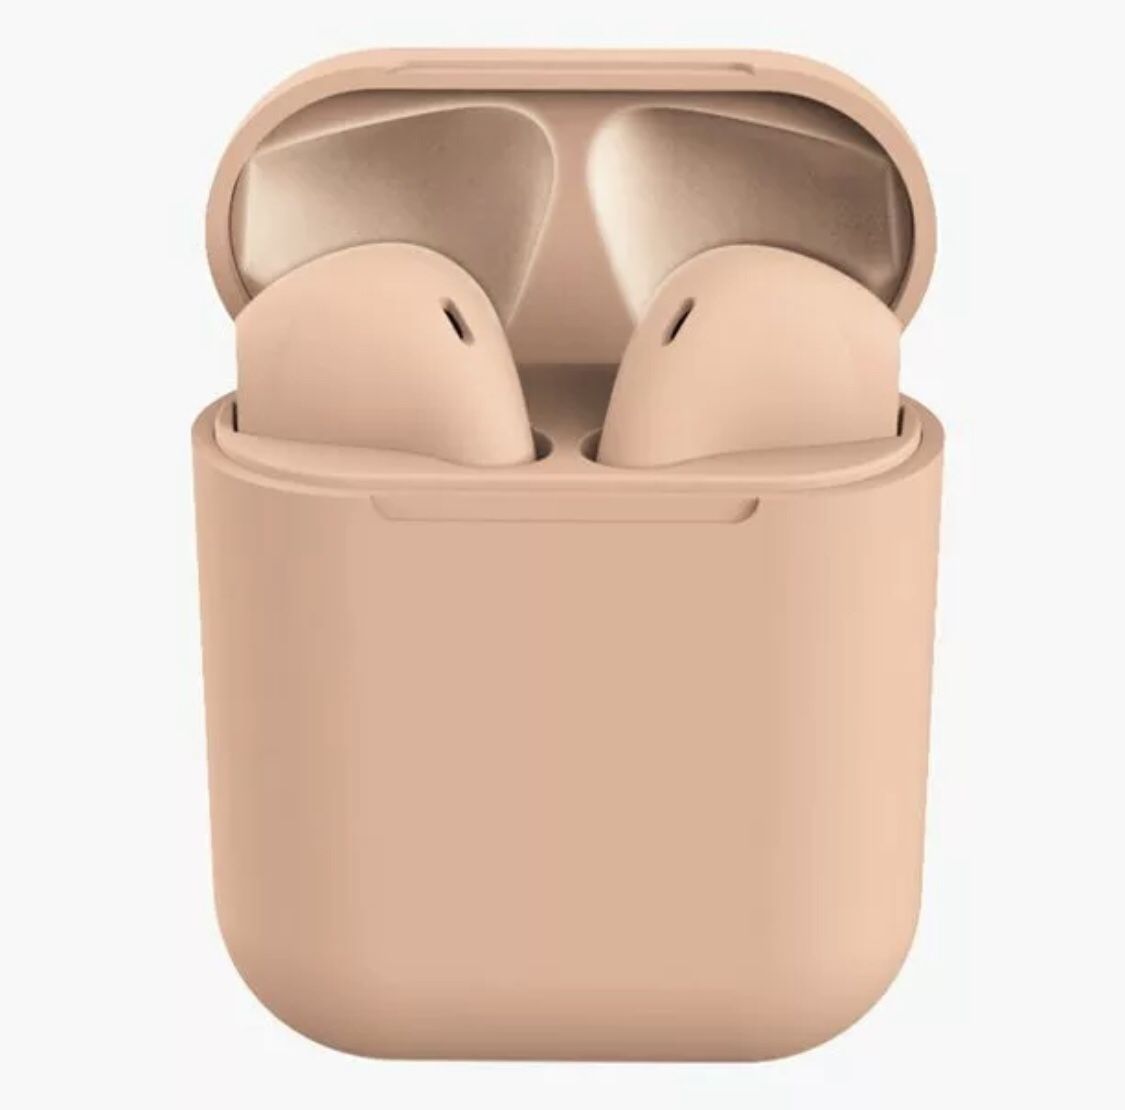 Airpods bluetooth earbuds pink